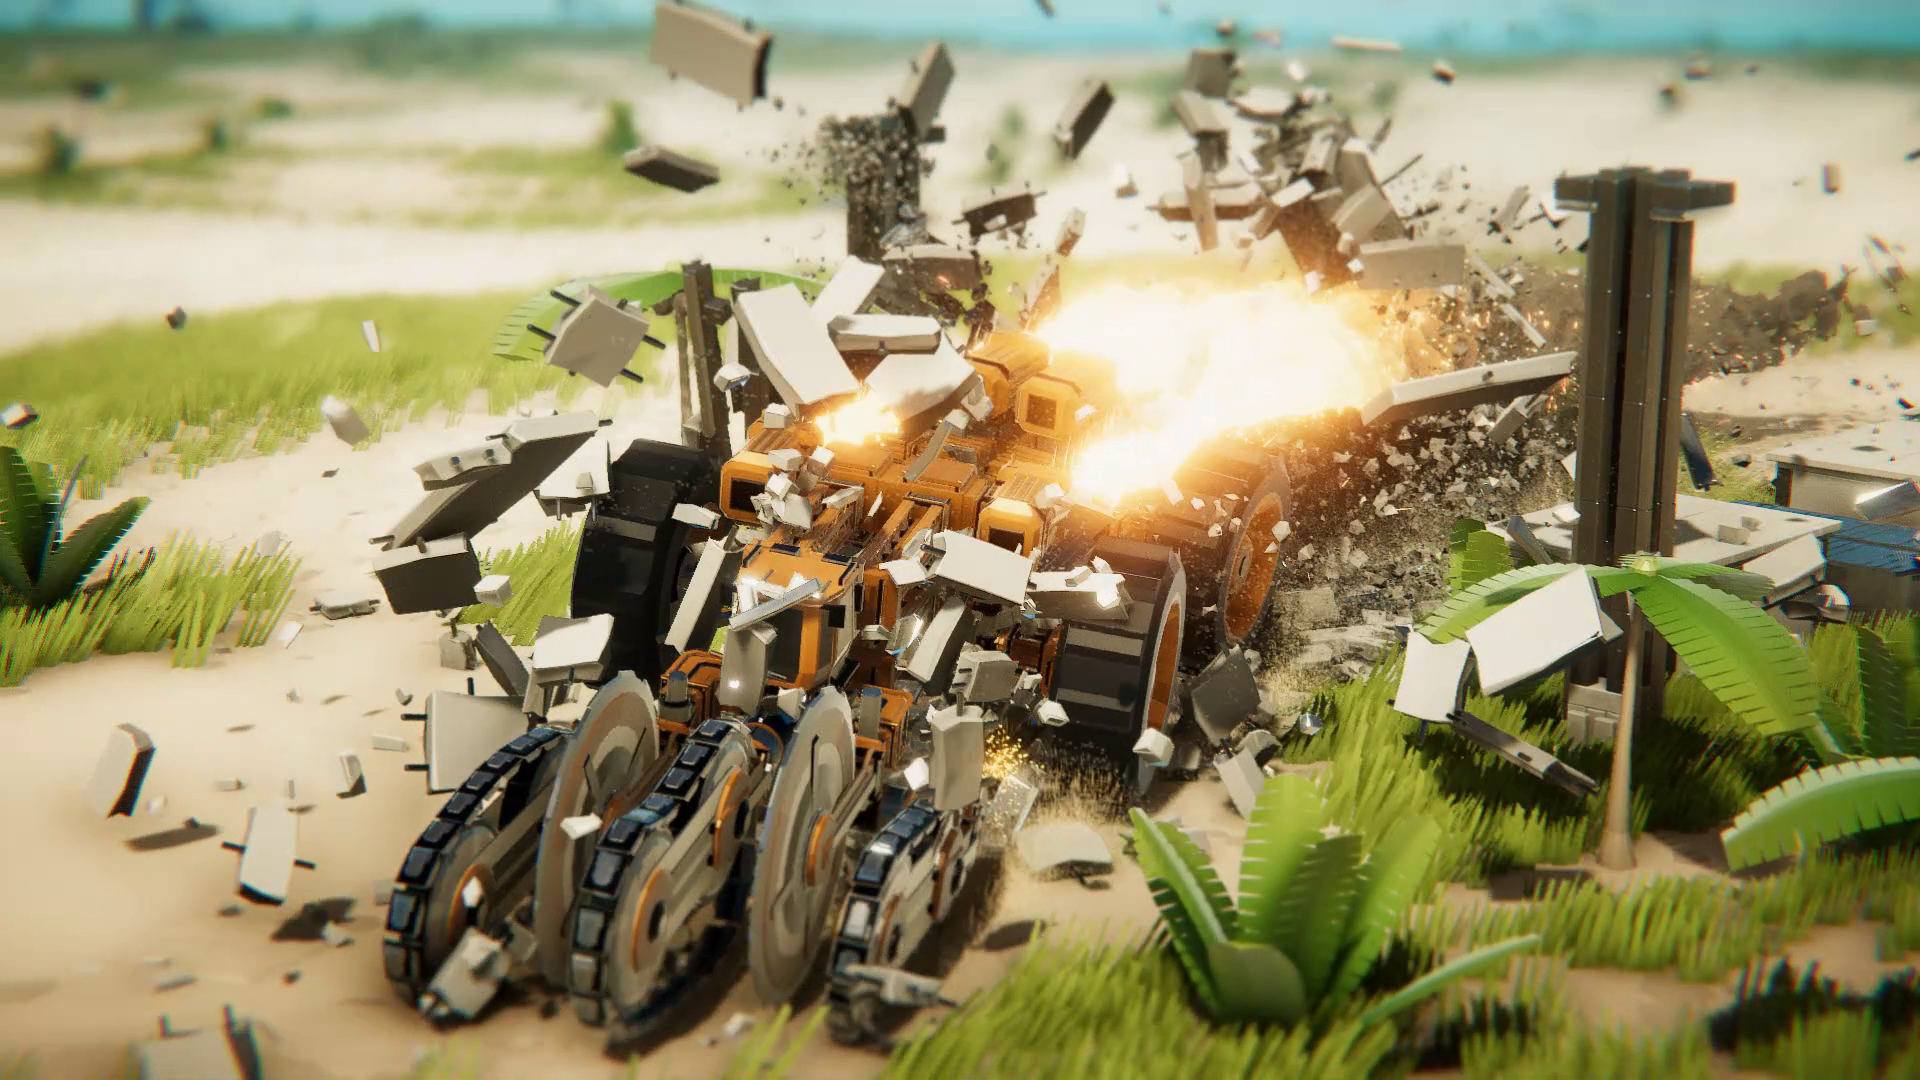  Build the wrecking machine of your dreams in this glorious destruction sandbox 